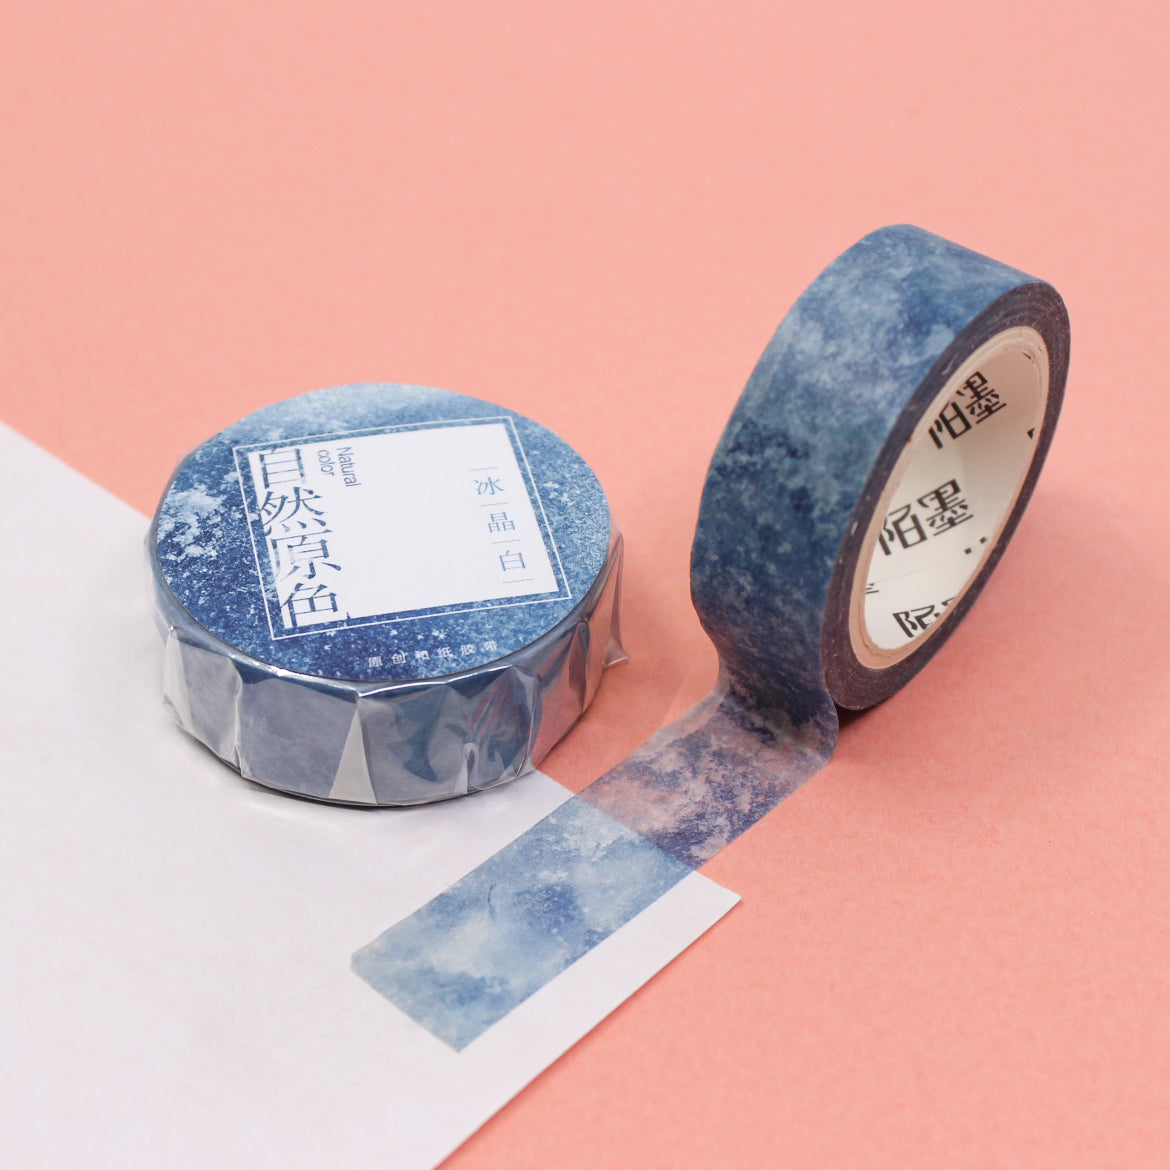 This blue jean marble watercolor washi tape is the perfect addition to your washi collection. The simplicity of the pattern is perfect for accenting and matching any project's theme while adding a beautiful and interesting pattern. This tape is sold at BBB Supplies Craft Shop.